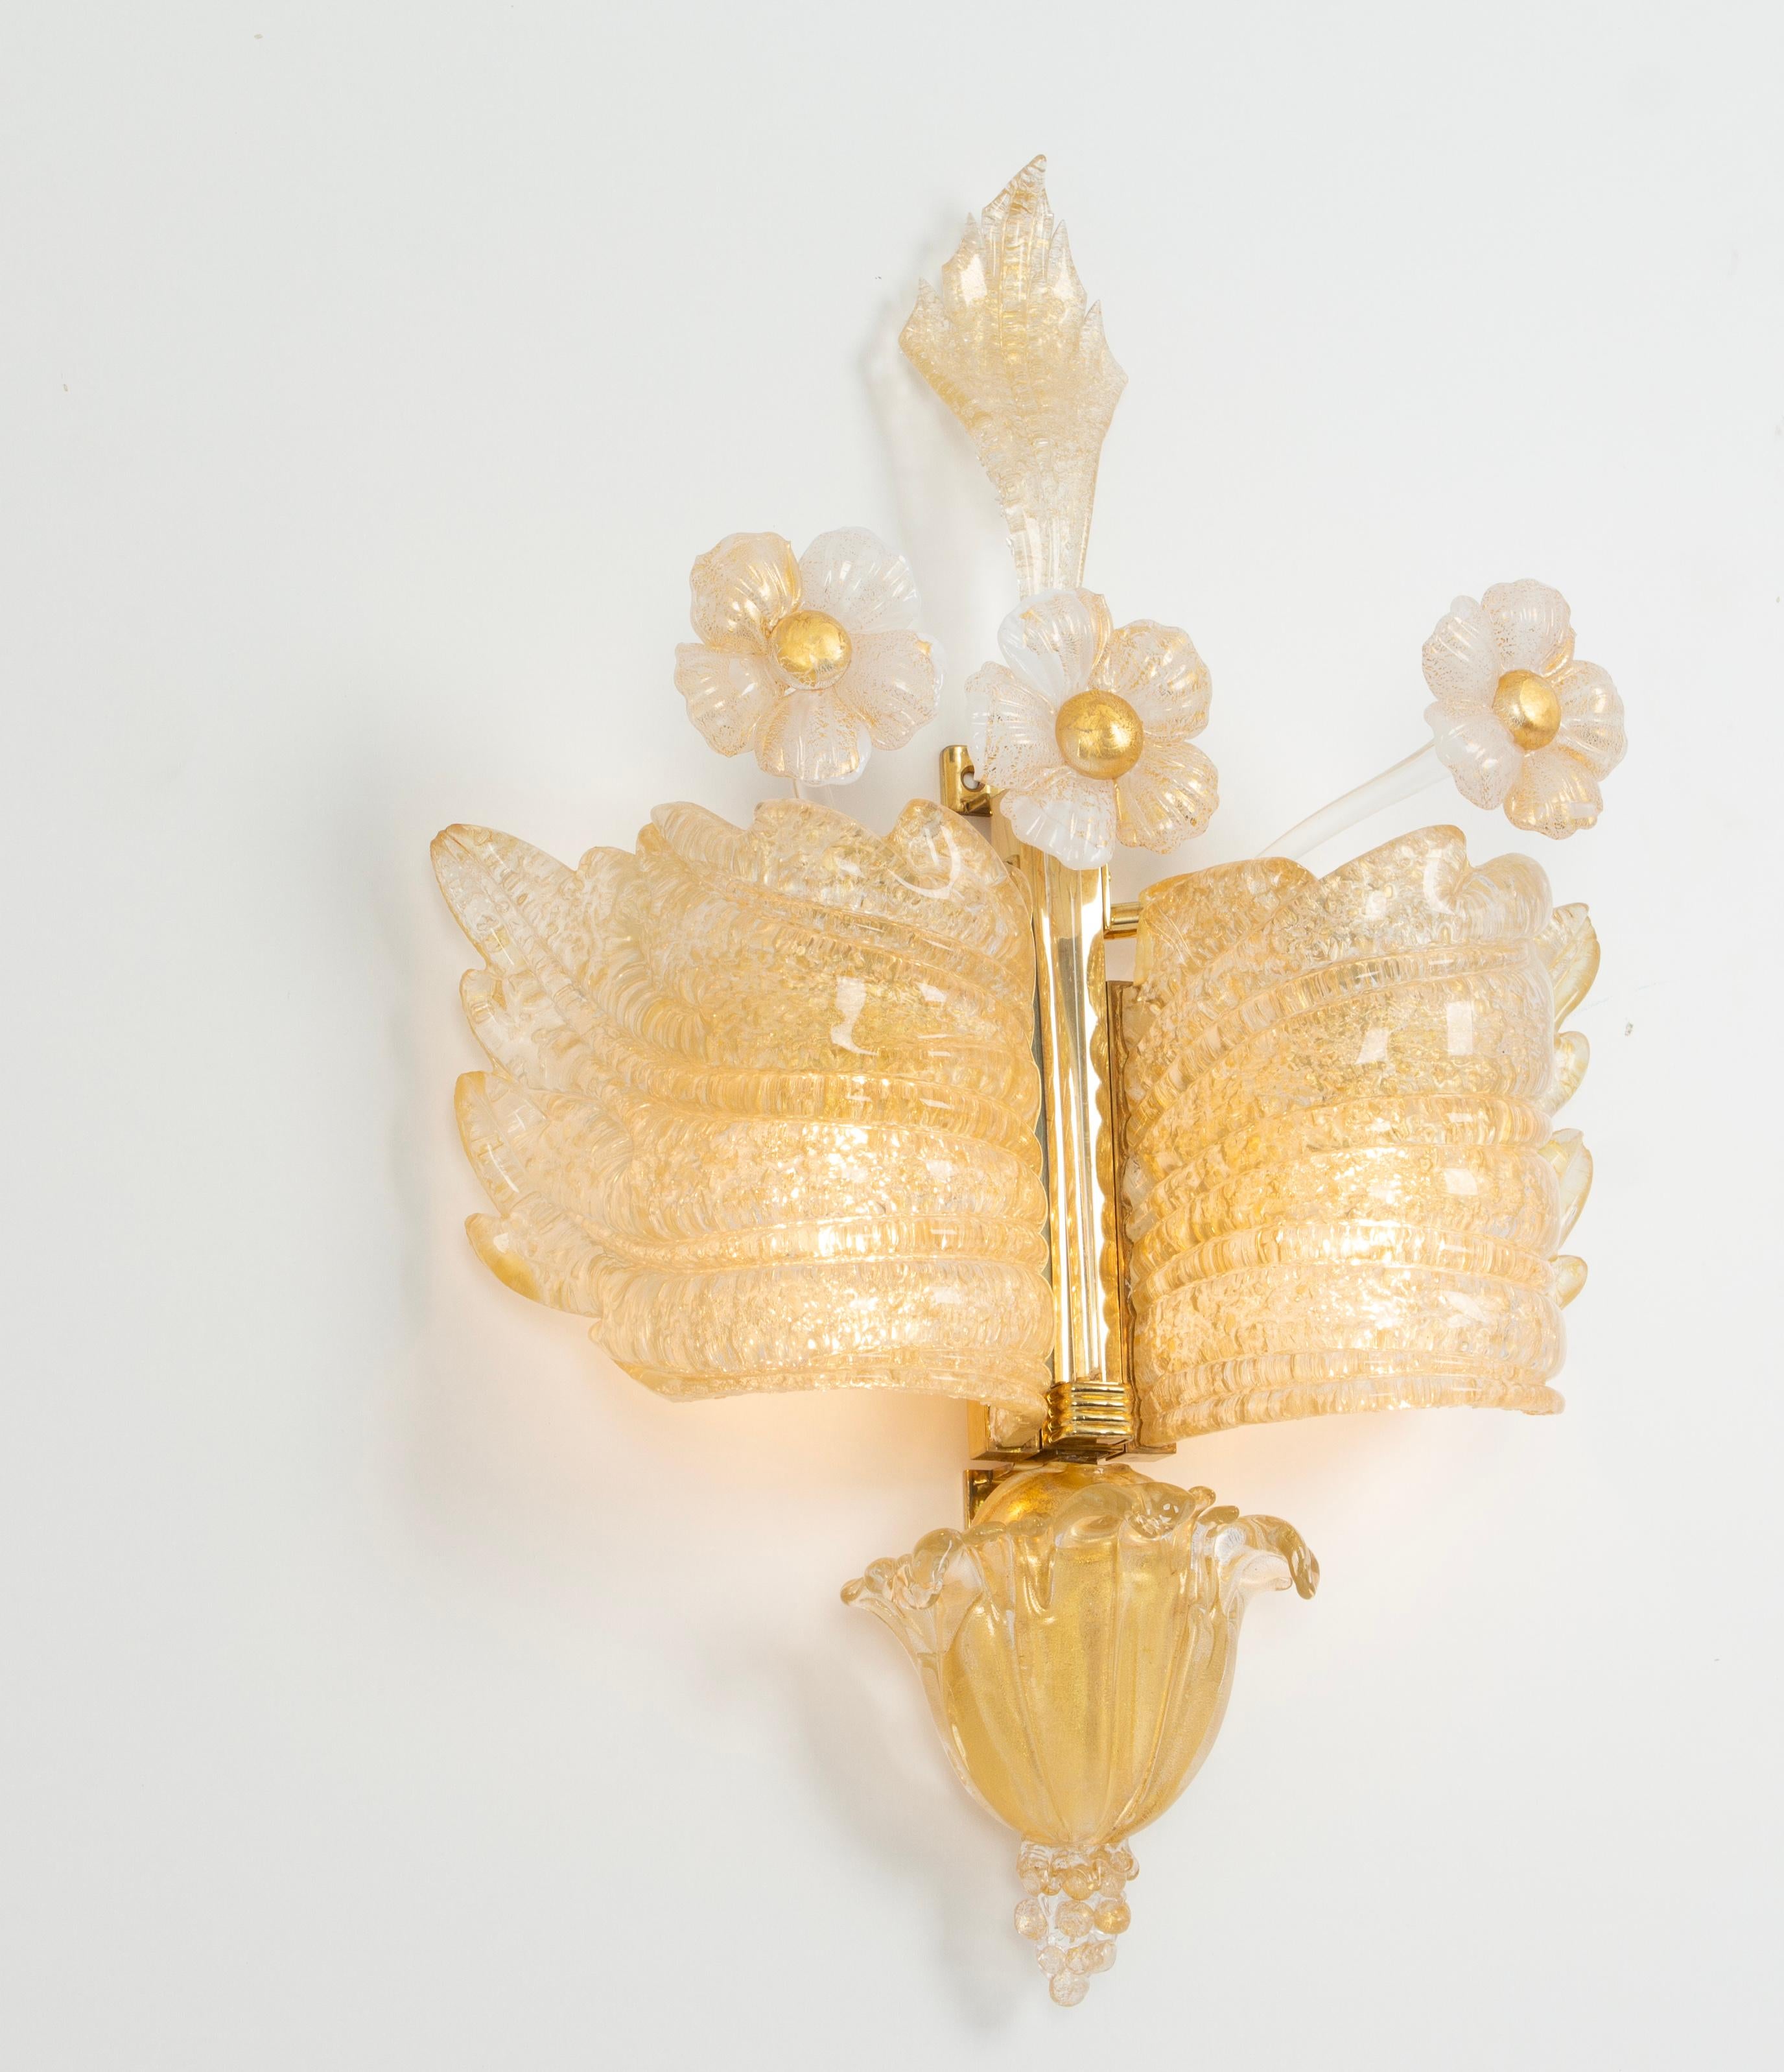 Pair of Large Murano Glass Wall Sconces by Barovier & Toso, Italy, 1970s For Sale 7